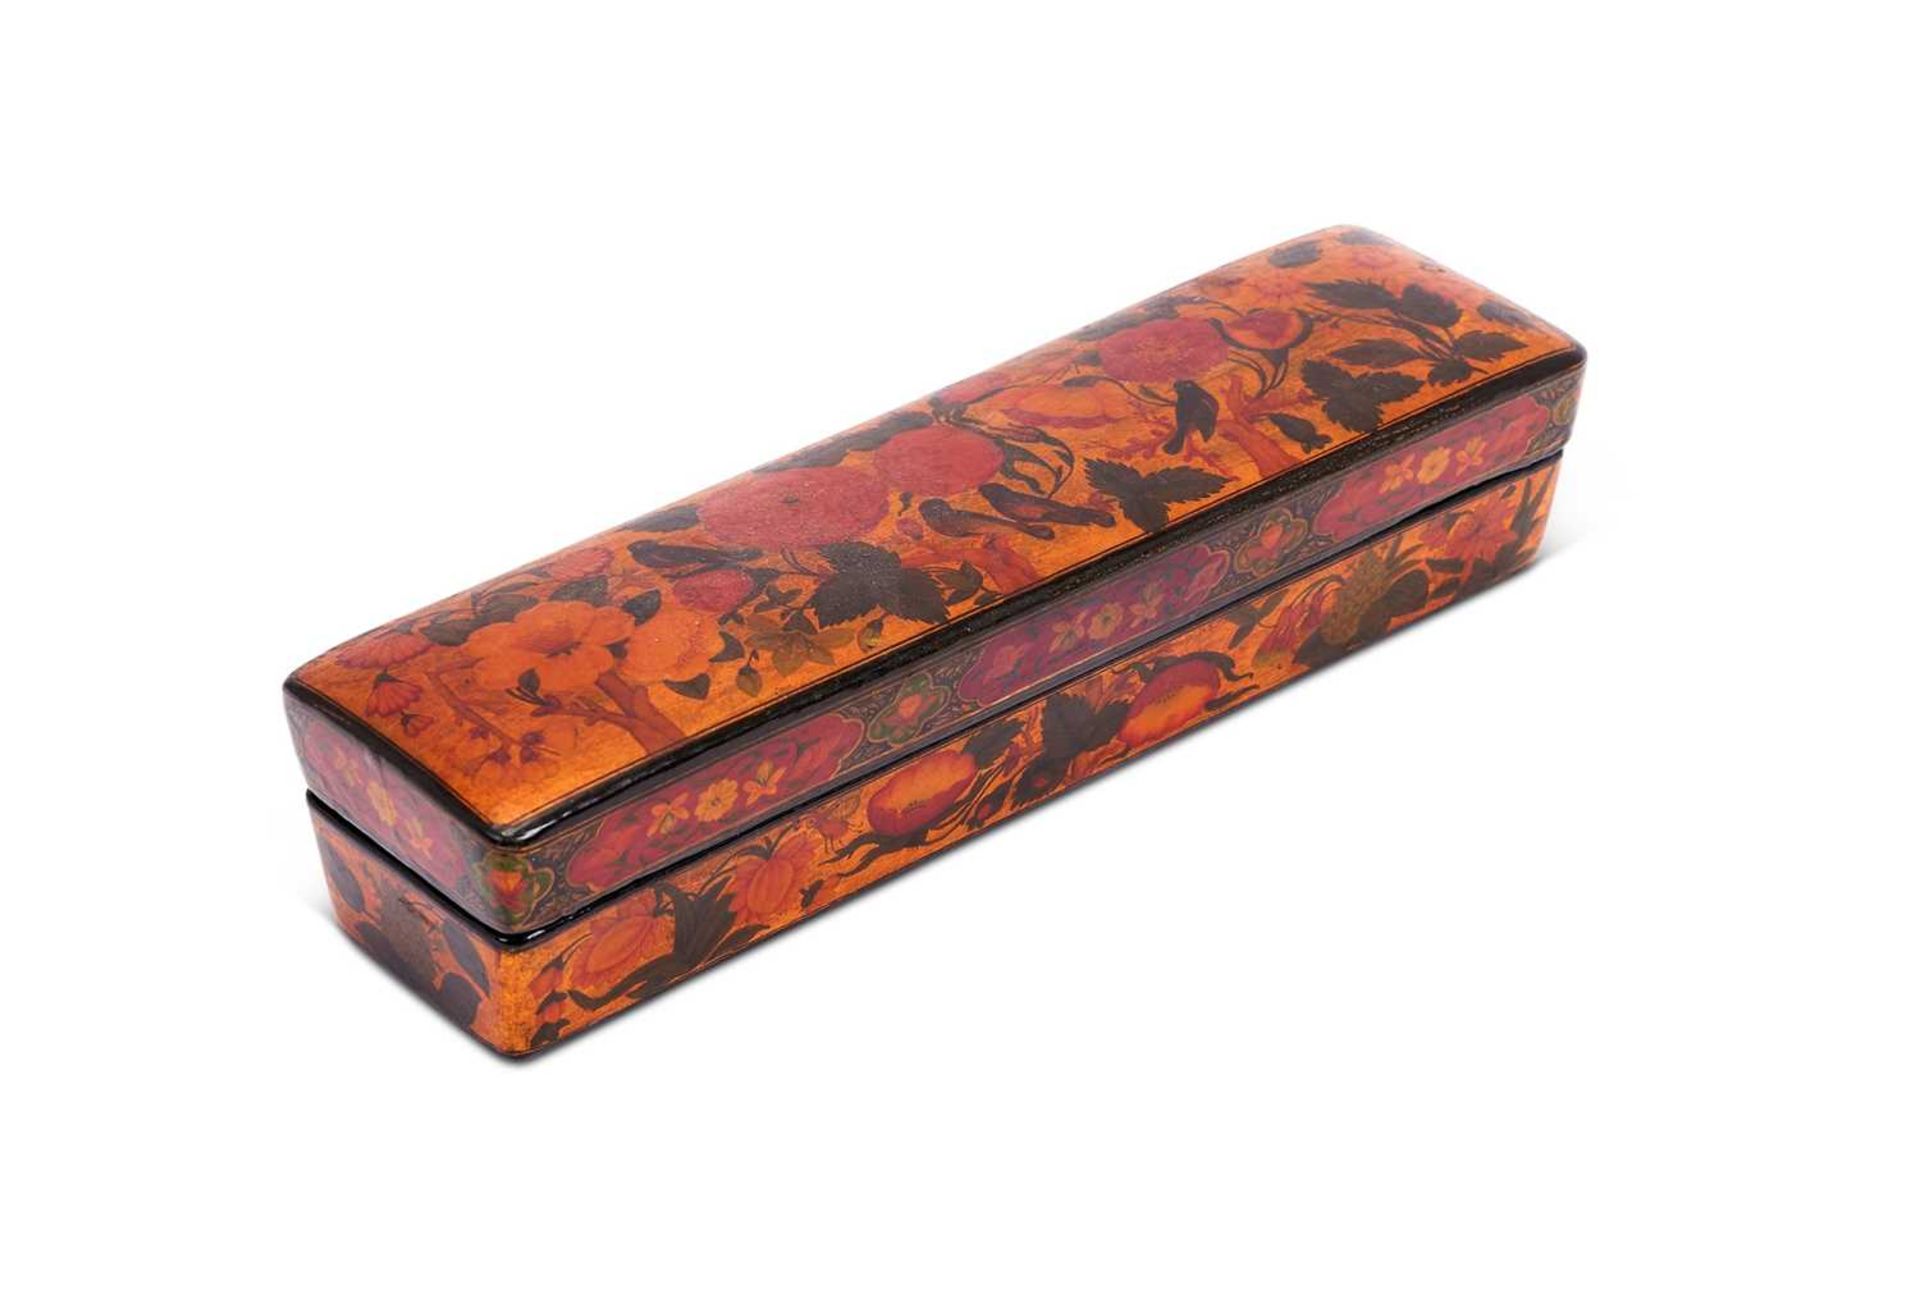 A LARGE 19TH CENTURY OR EARLIER PERSIAN LACQUERED SCHOLAR'S PEN BOX